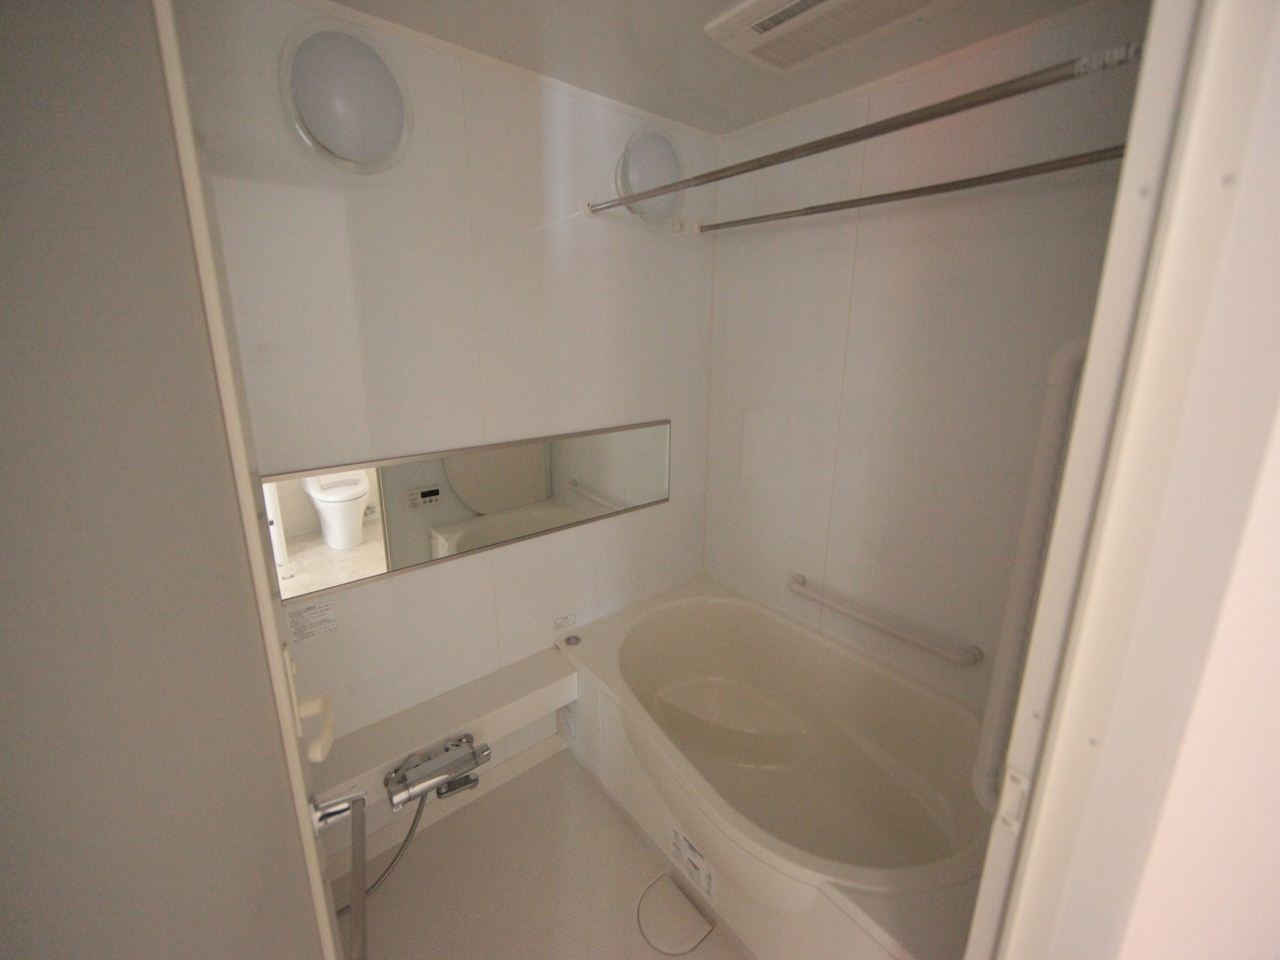 Bath. Bathroom with heating dryer Bathing with 24-hour ventilation function